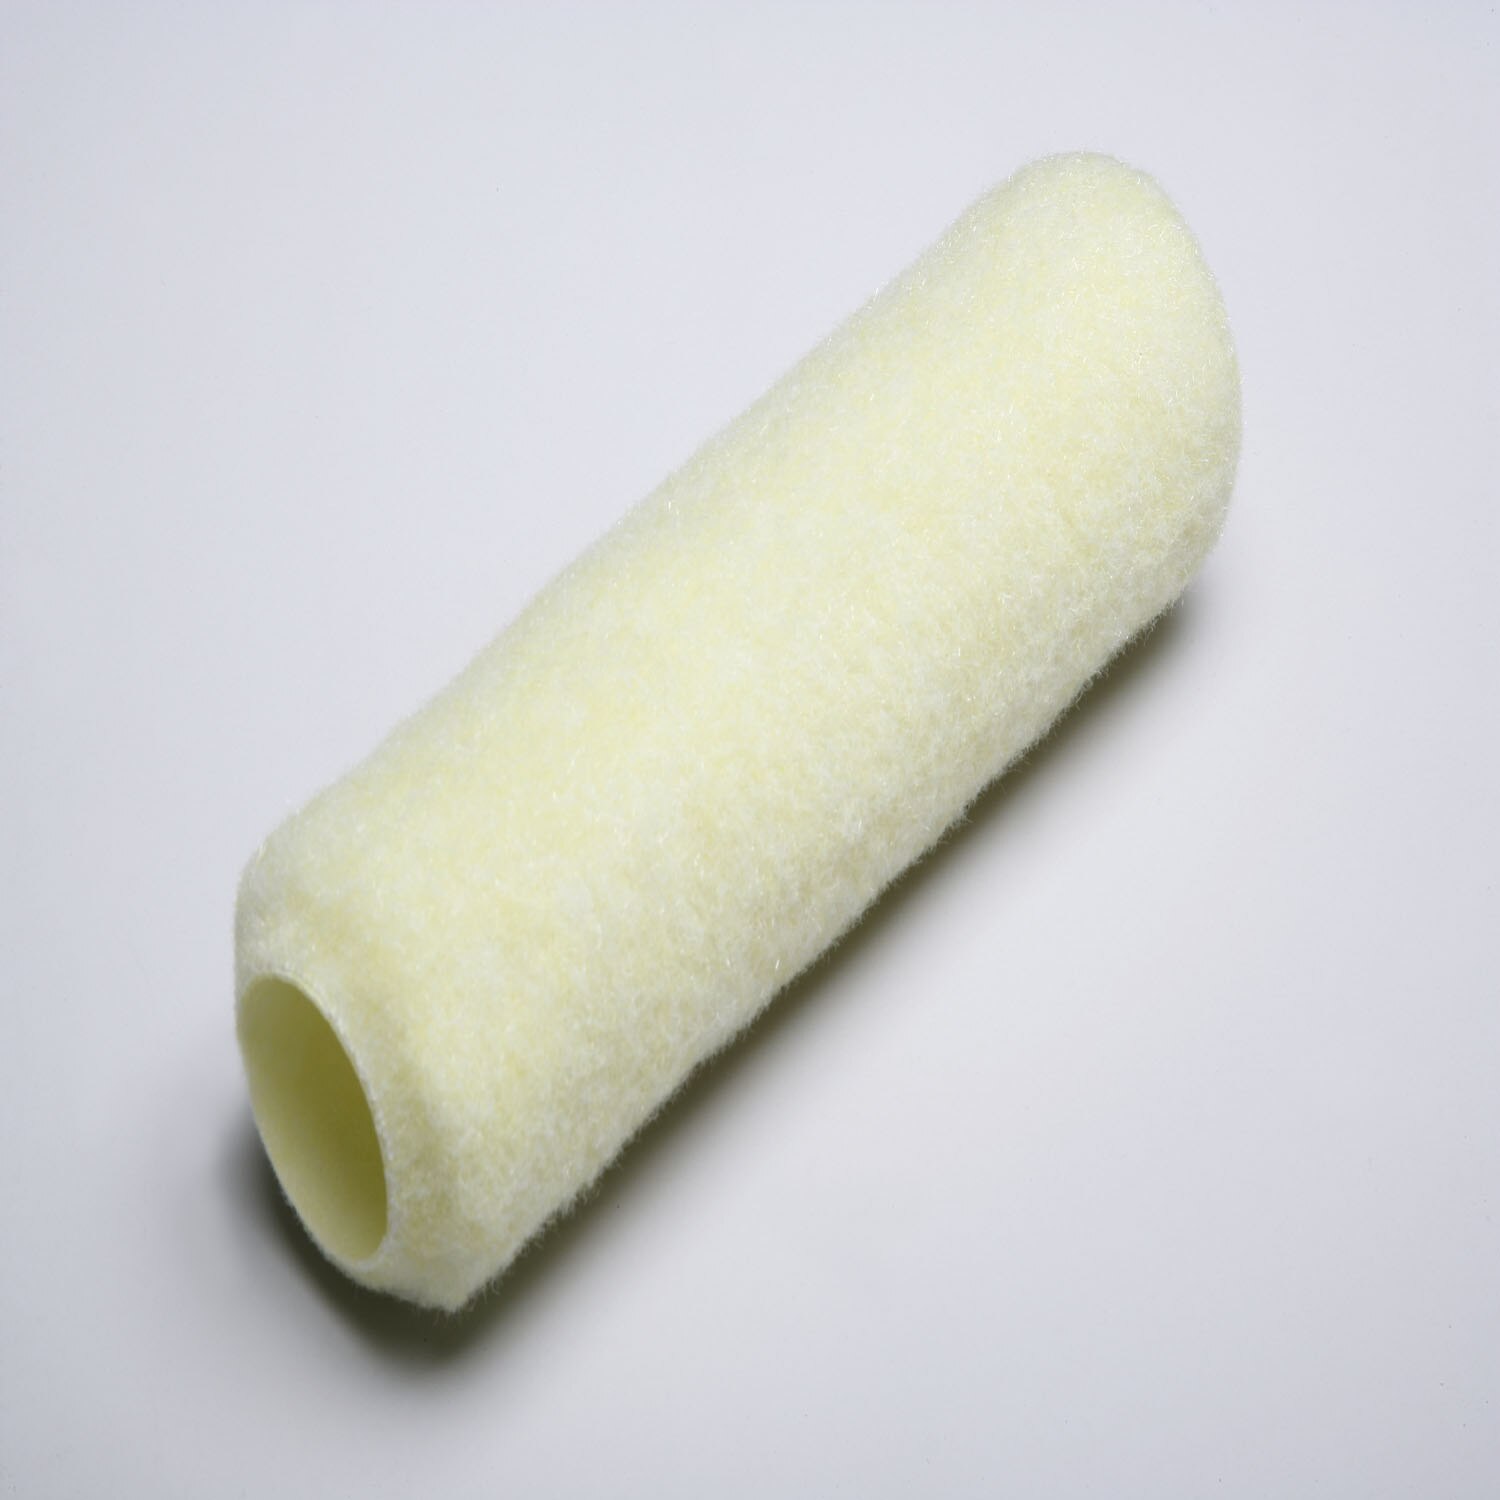 Cover, Paint roller, 9", Knit fabric, Extra Strength Core, 1/2" Nap, EA